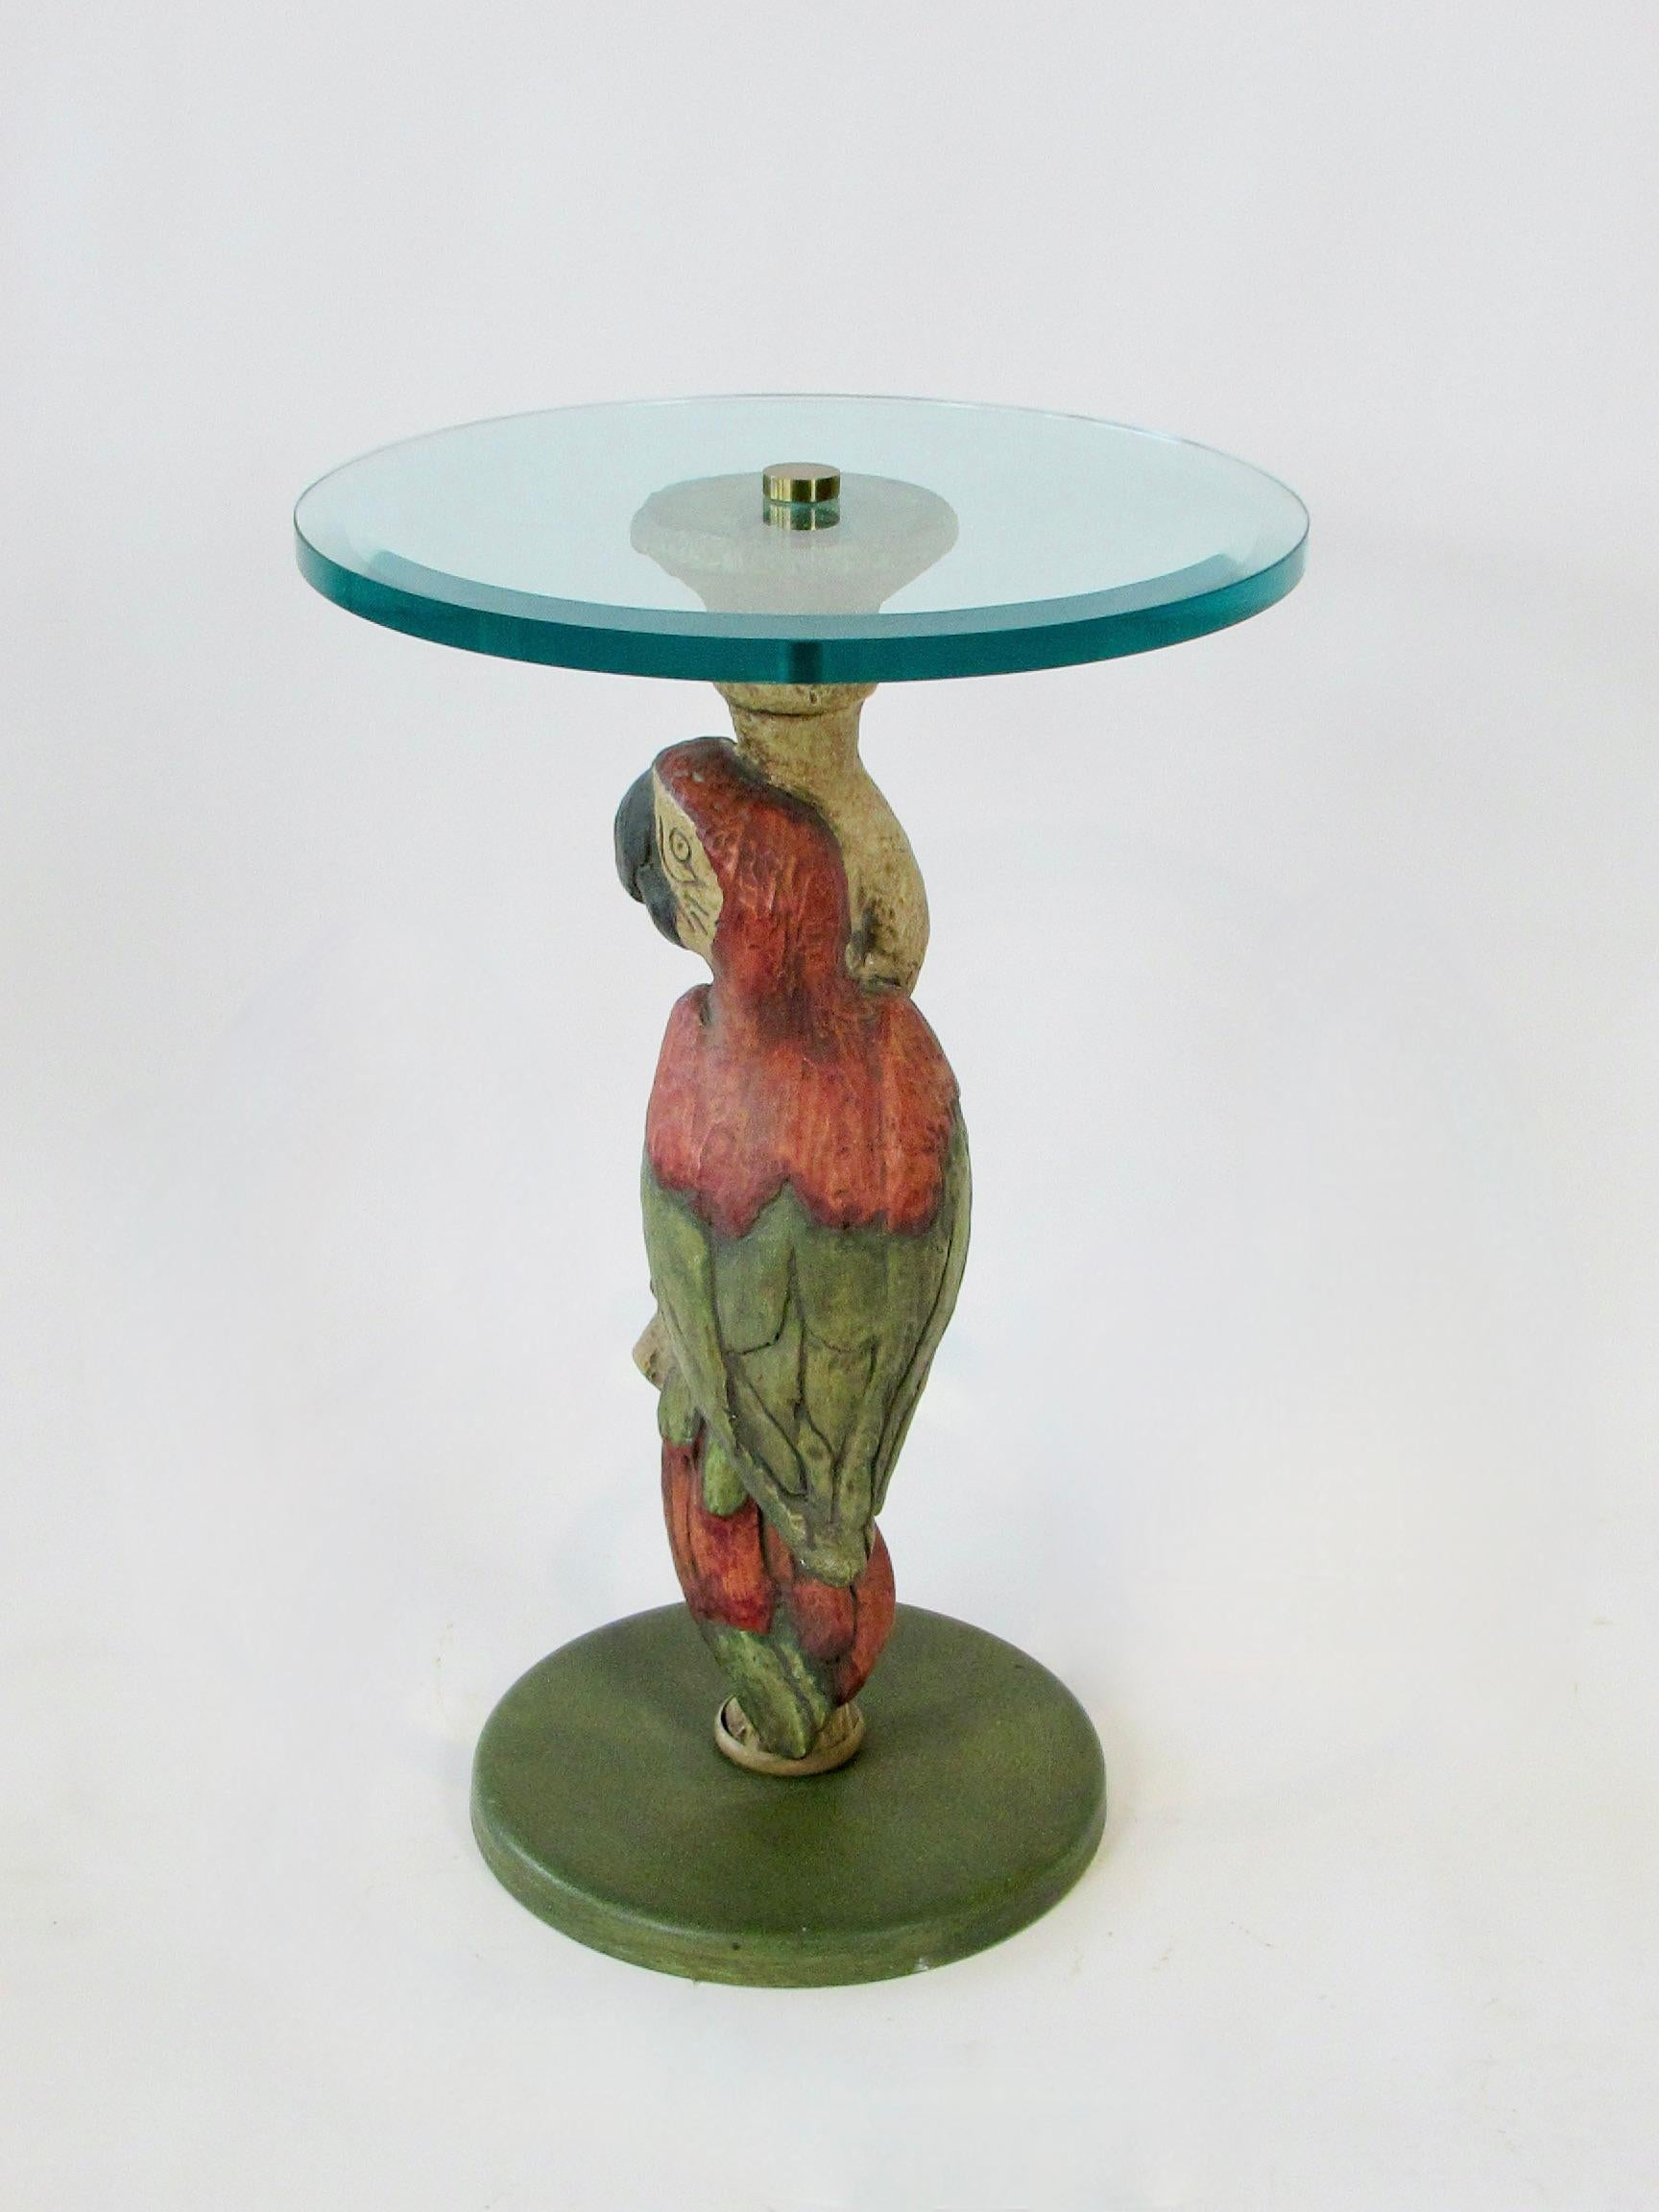 20th Century Whimsical Polly Want a Table Bevel Glass on Parrot Base Style of Maitland Smith For Sale